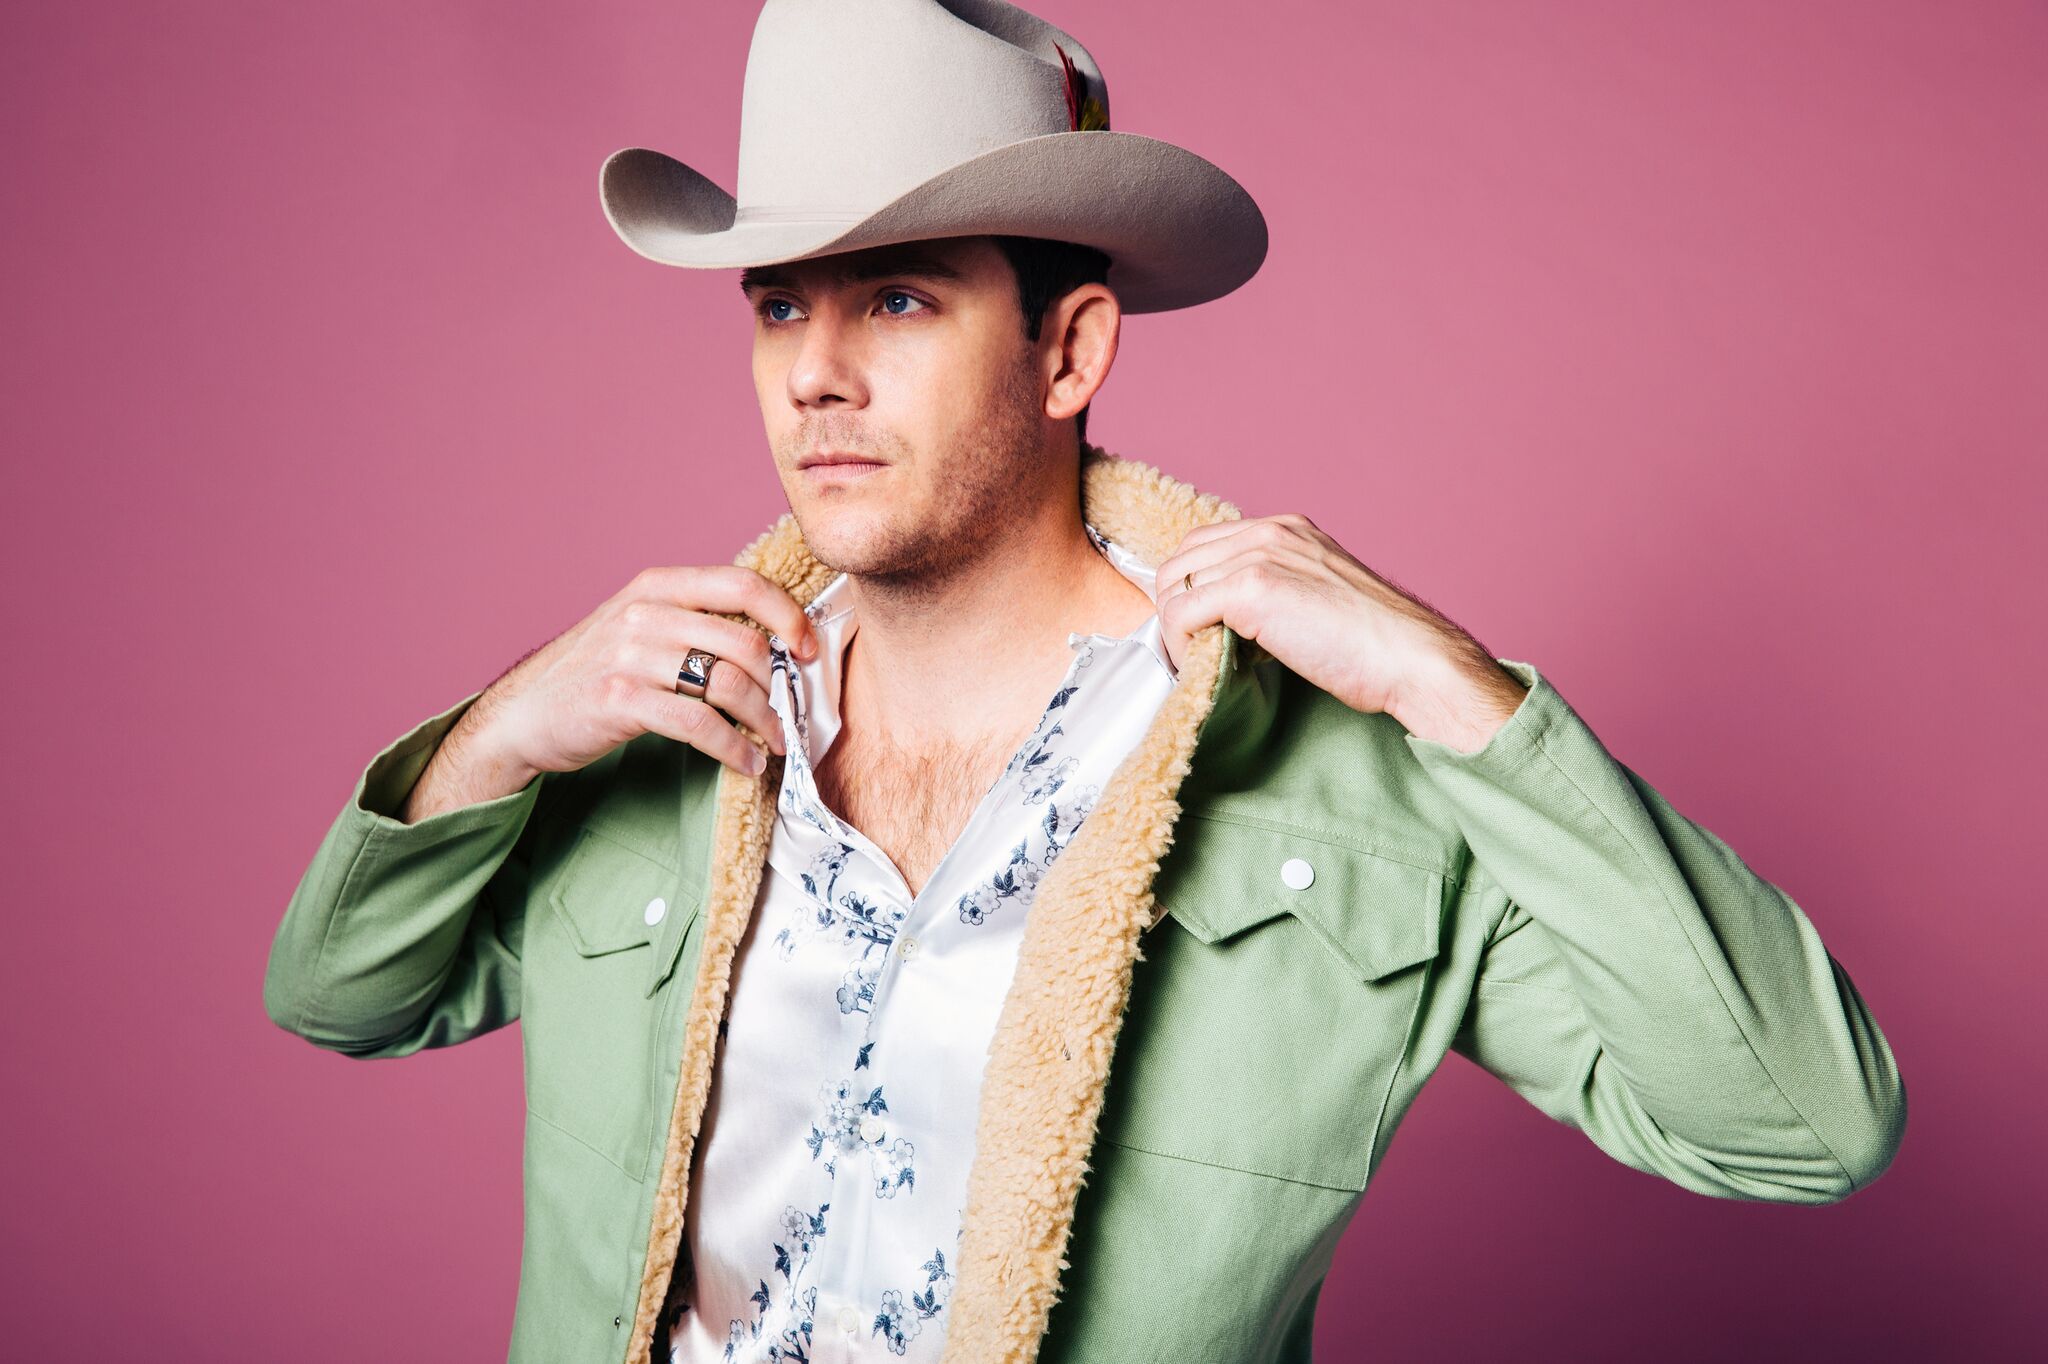 Sam Outlaw and Jim Lauderdale will be performing at Paradiso next week